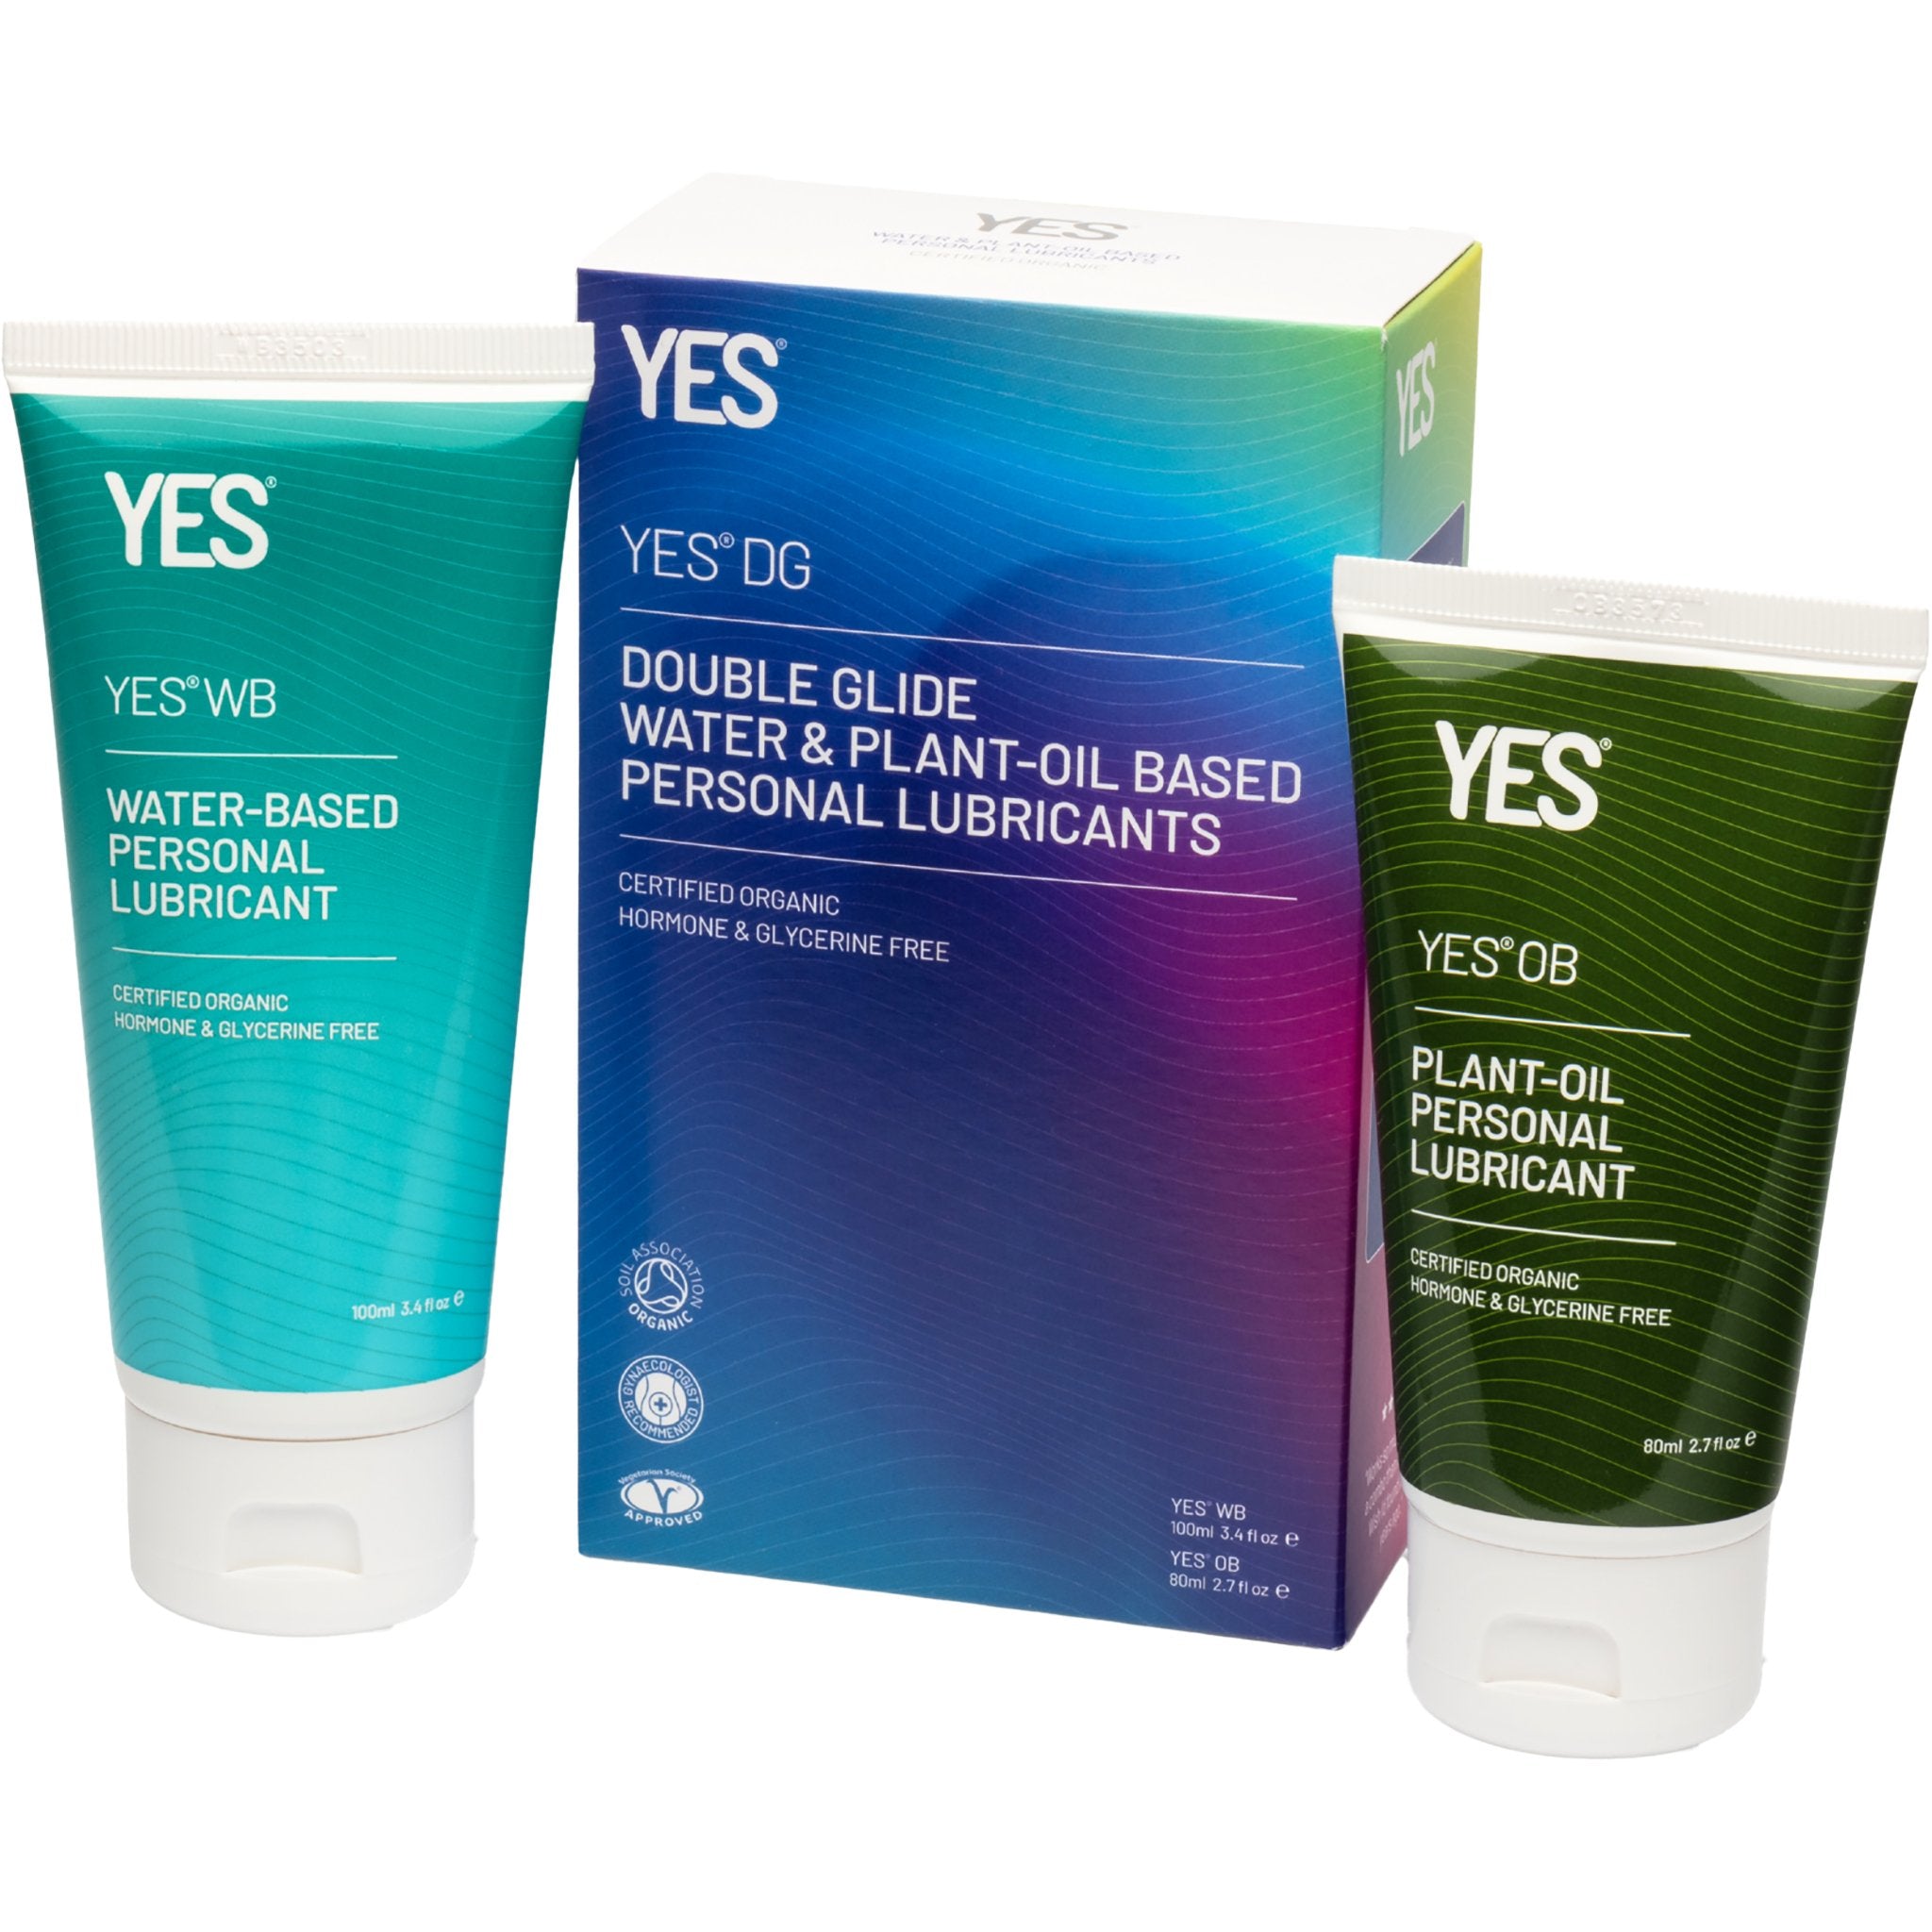 YES® Double Glide | Lubricant Combo Set - Worth £24 - mypure.co.uk